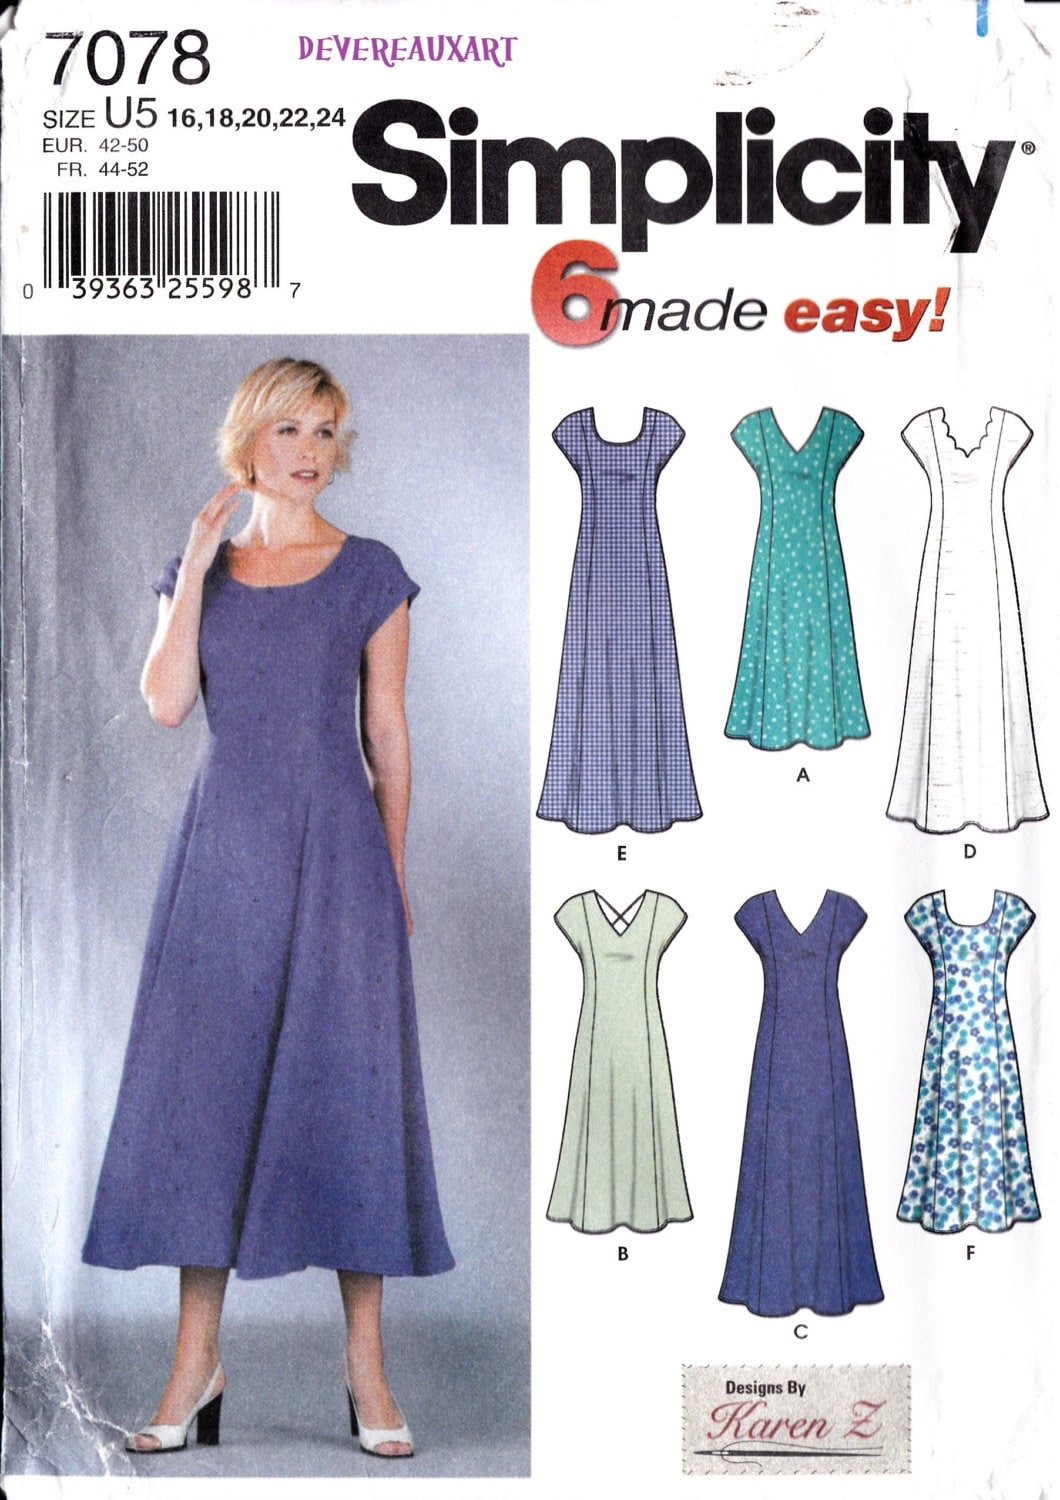 2002 Simplicity 6-Made-easy Pattern 7078 by Devereauxart on Etsy